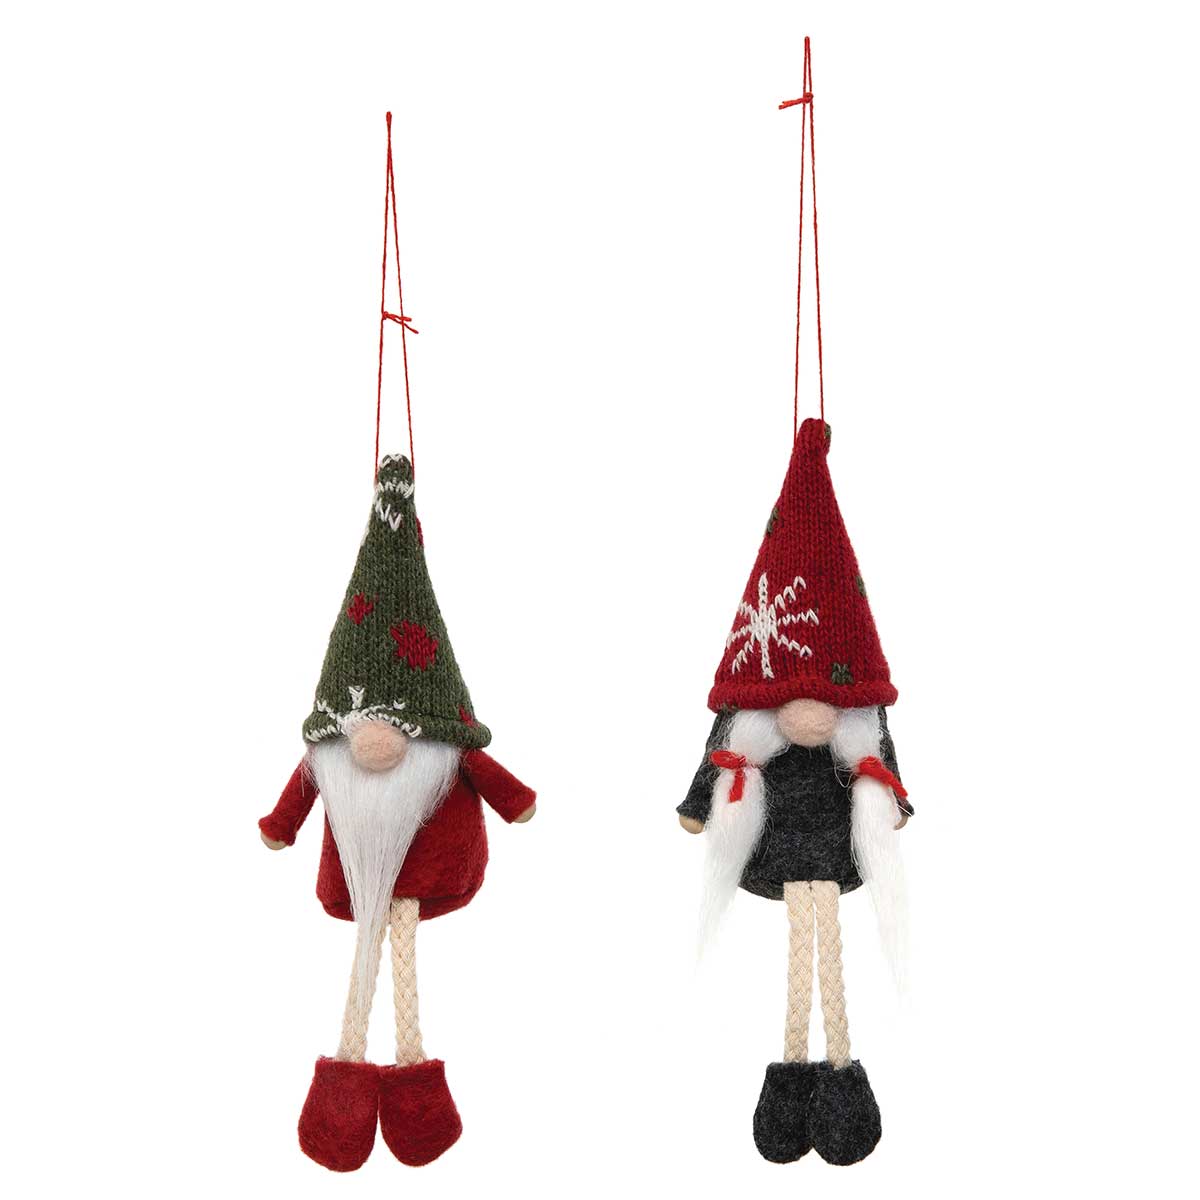 ORN GNOME WITH ROPE LEGS 2 ASSORTED 2IN X 7IN